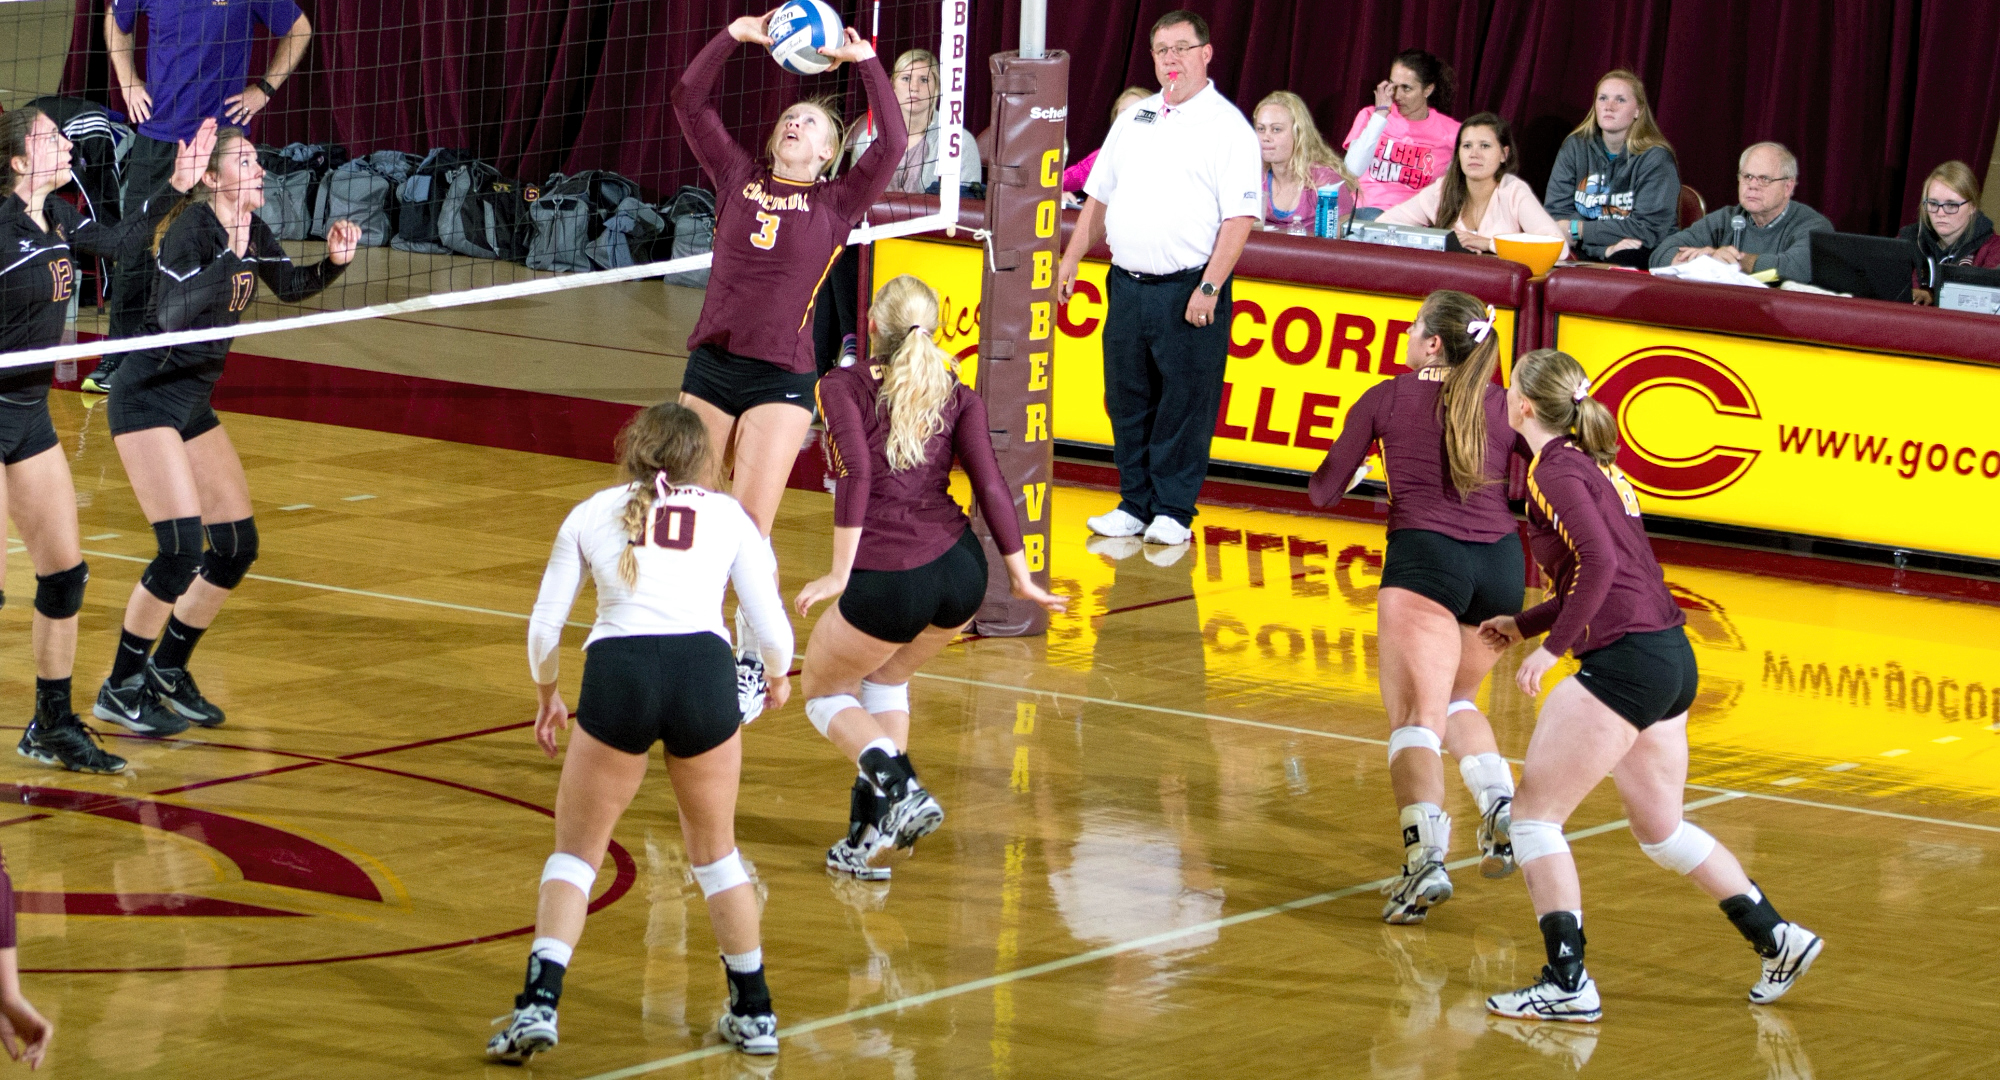 Concordia faced three teams ranked in the Top 25 at the Pikes Peak Challenge. Senior setter Jena Klaphake (#3) led the team with 131 total assists.